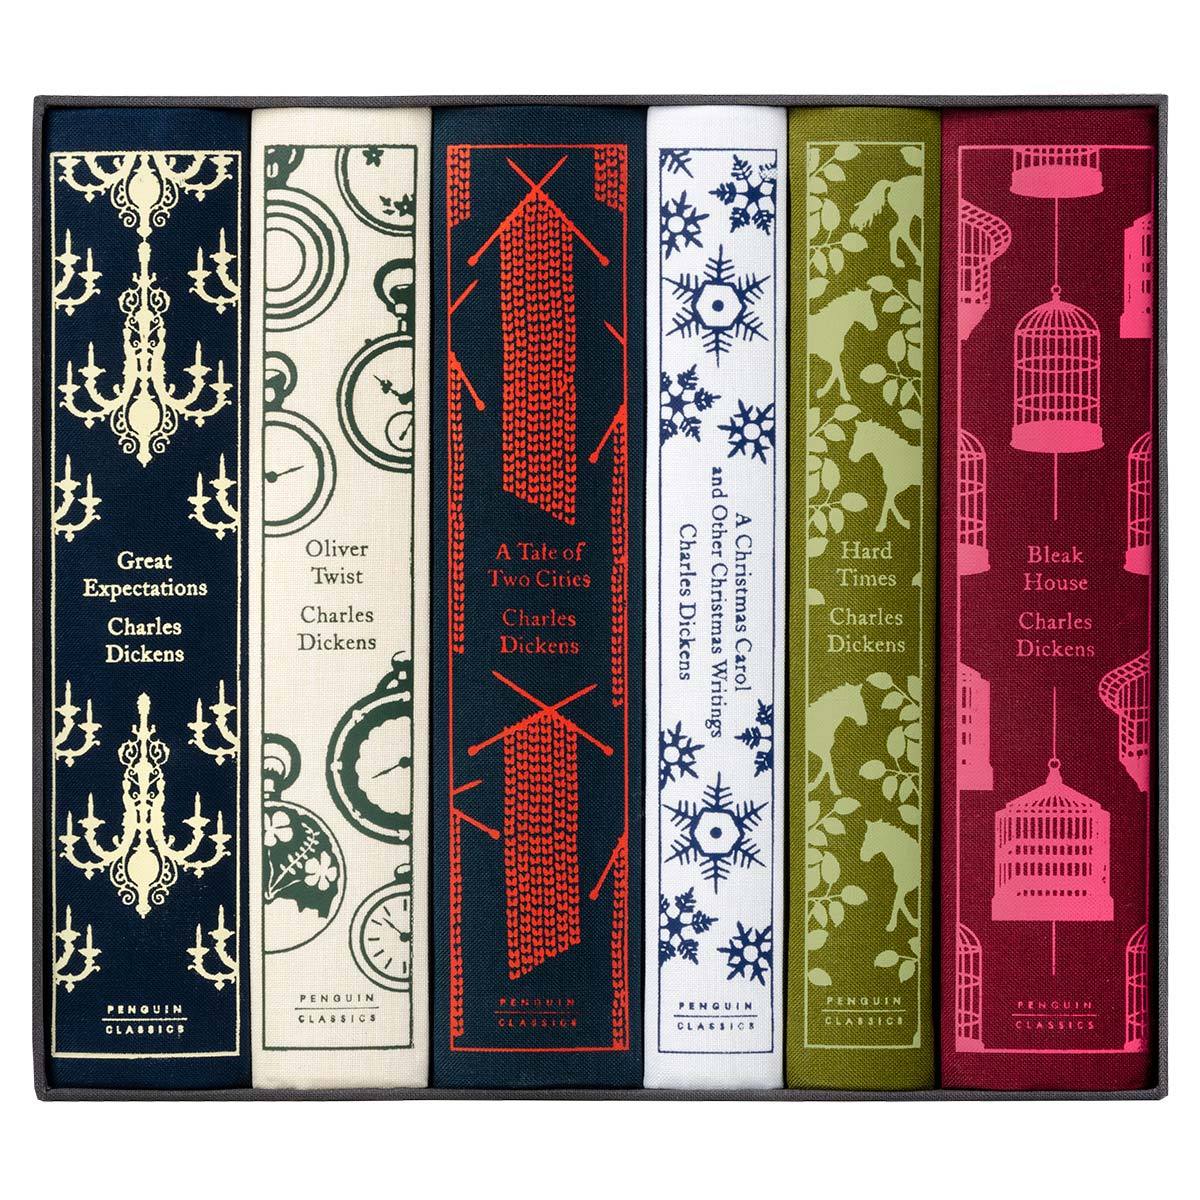 Image of Publisher Boxed Set: Penguin Classics Charles Dickens 6 Book Collection